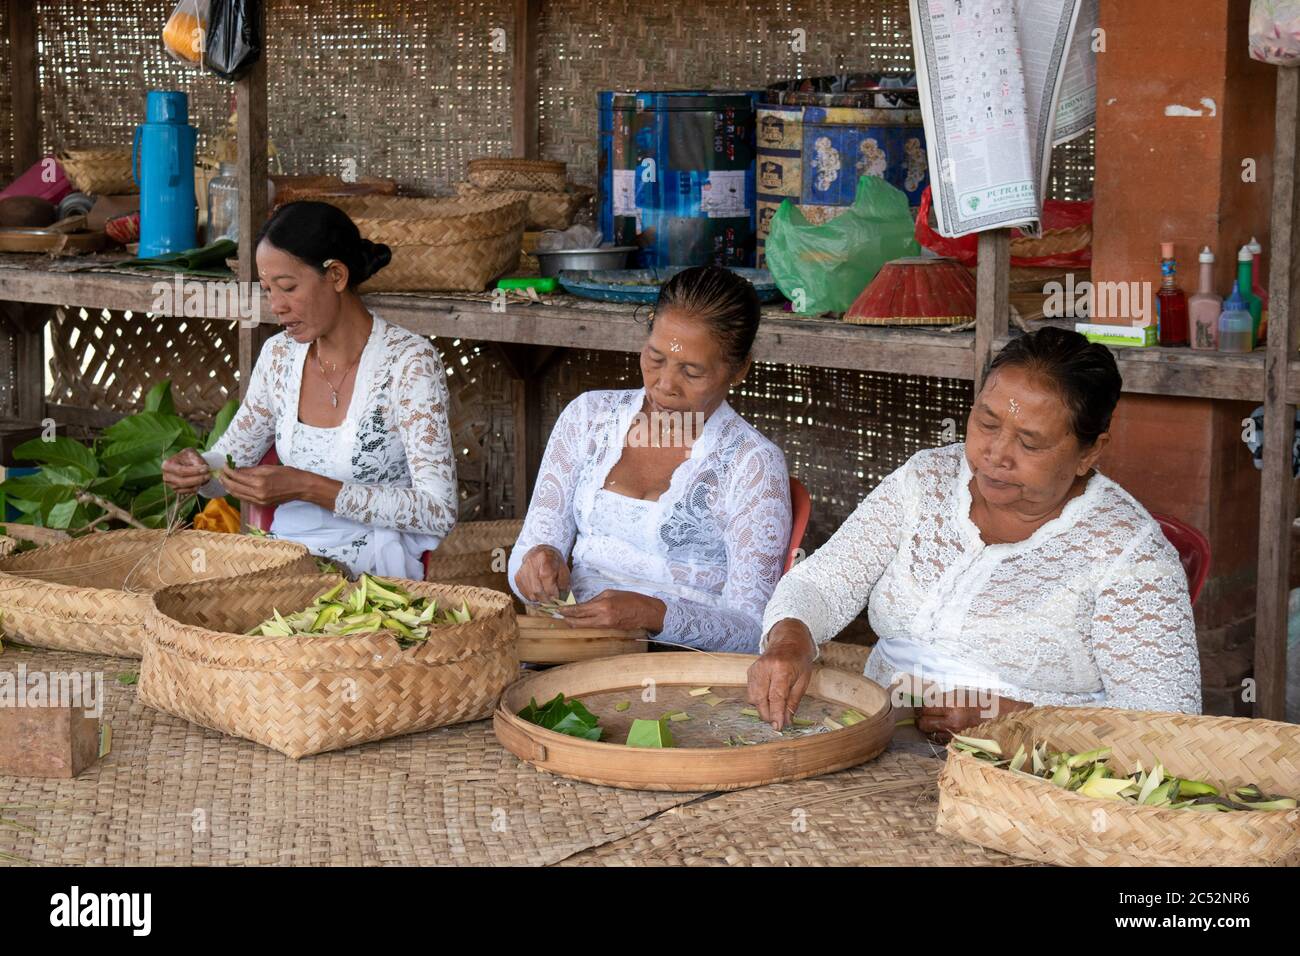 Ubud, Bali / Indonesia: Group of Indonesian women in white hand weaving baskets at a small artisanal shop near the Sacred Monkey Forest. Stock Photo